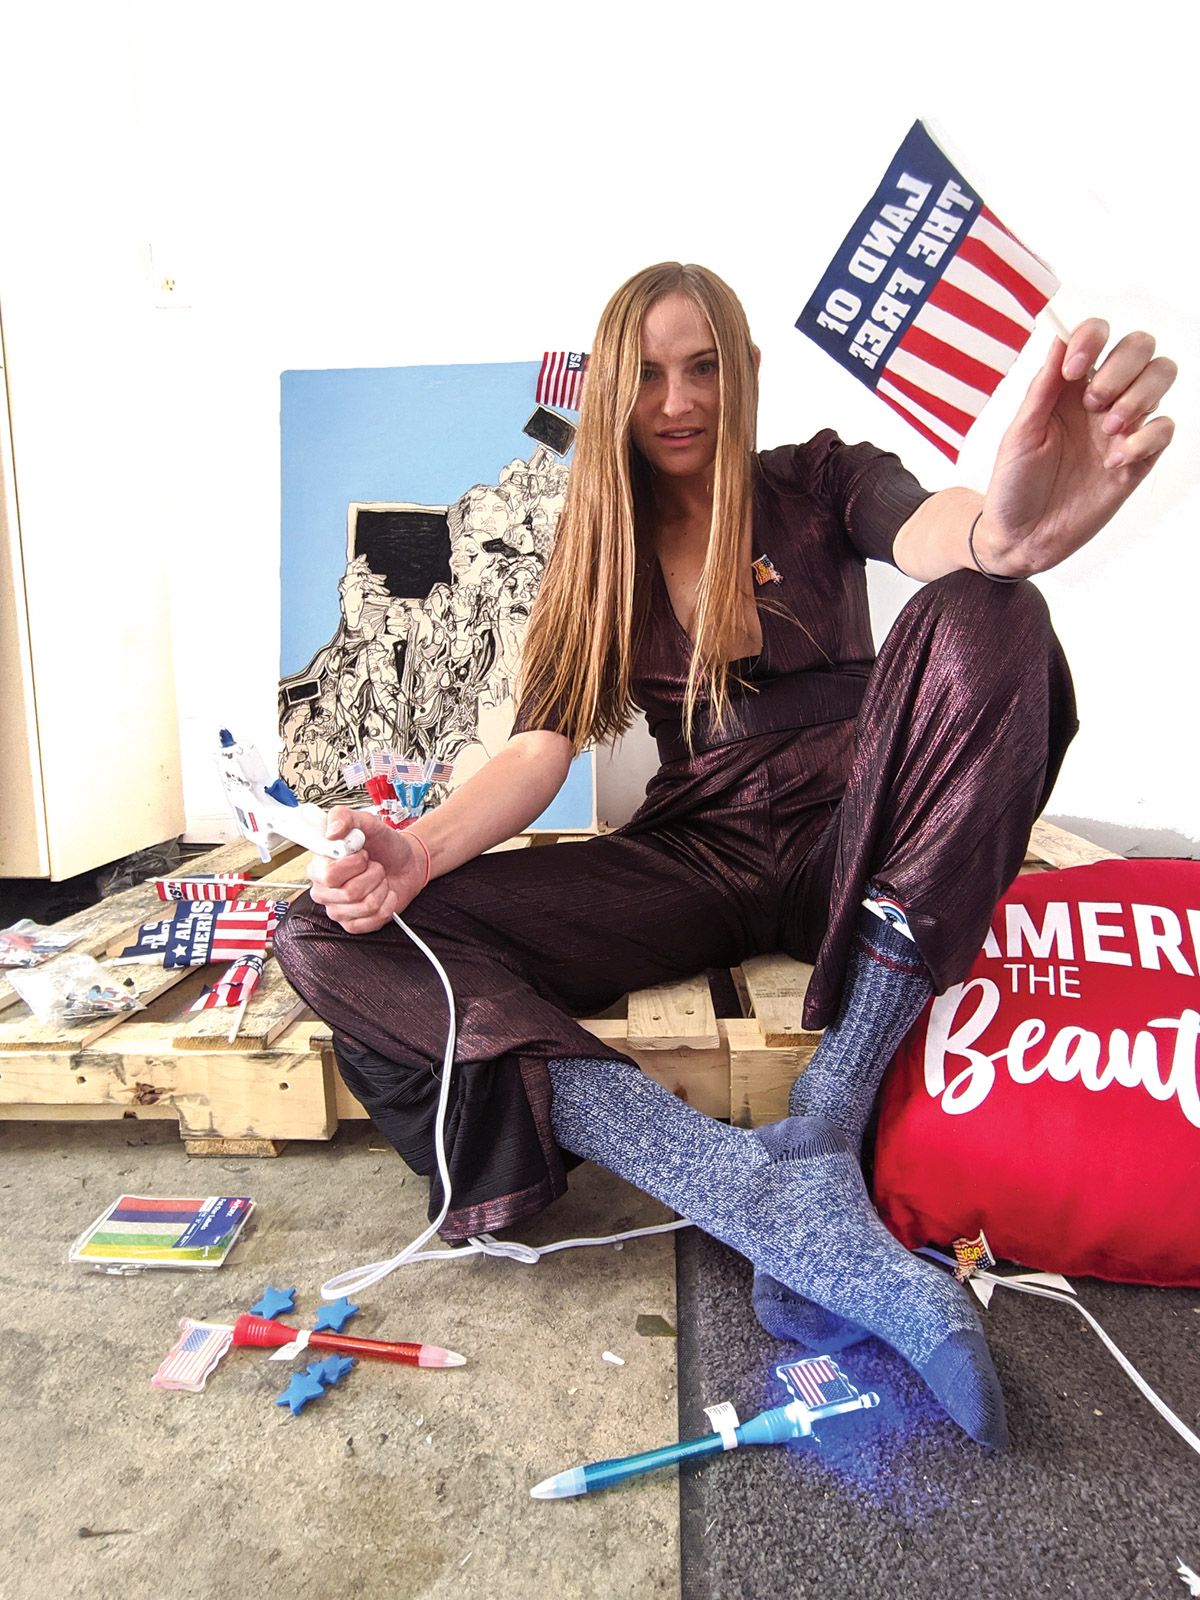 In The Next American President, Gretchen Andrew uses the inspiration of mood boards to develop ideas and themes exploring her ideal qualities for a leader: “a kind, democracy-respecting, loving person” Courtesy of the artist